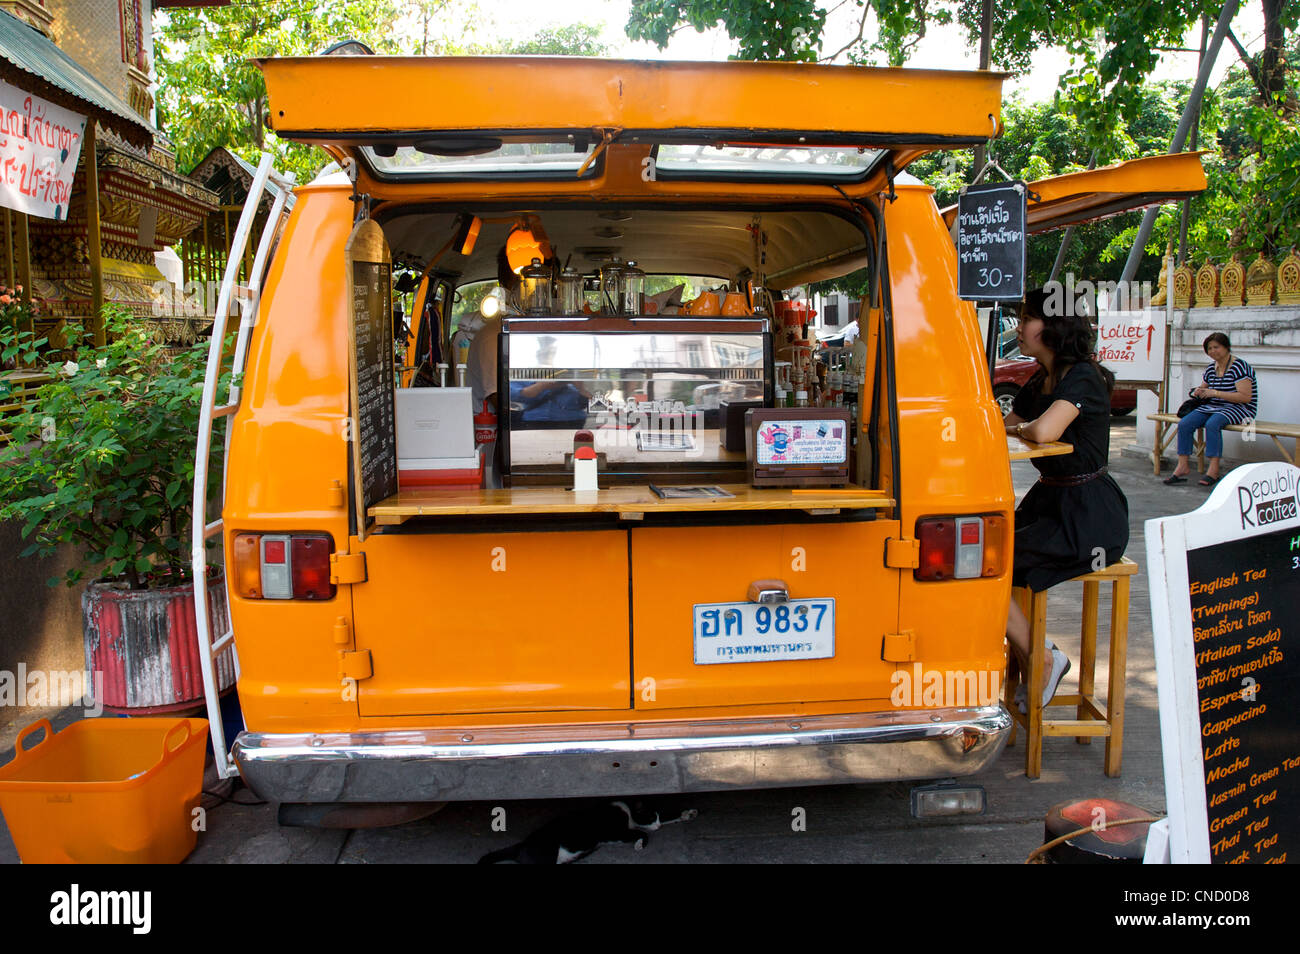 camper van cafe,vw cafe,yellow vw camper van,cafe in chiang mai,coffee,Thailand  Stock Photo - Alamy